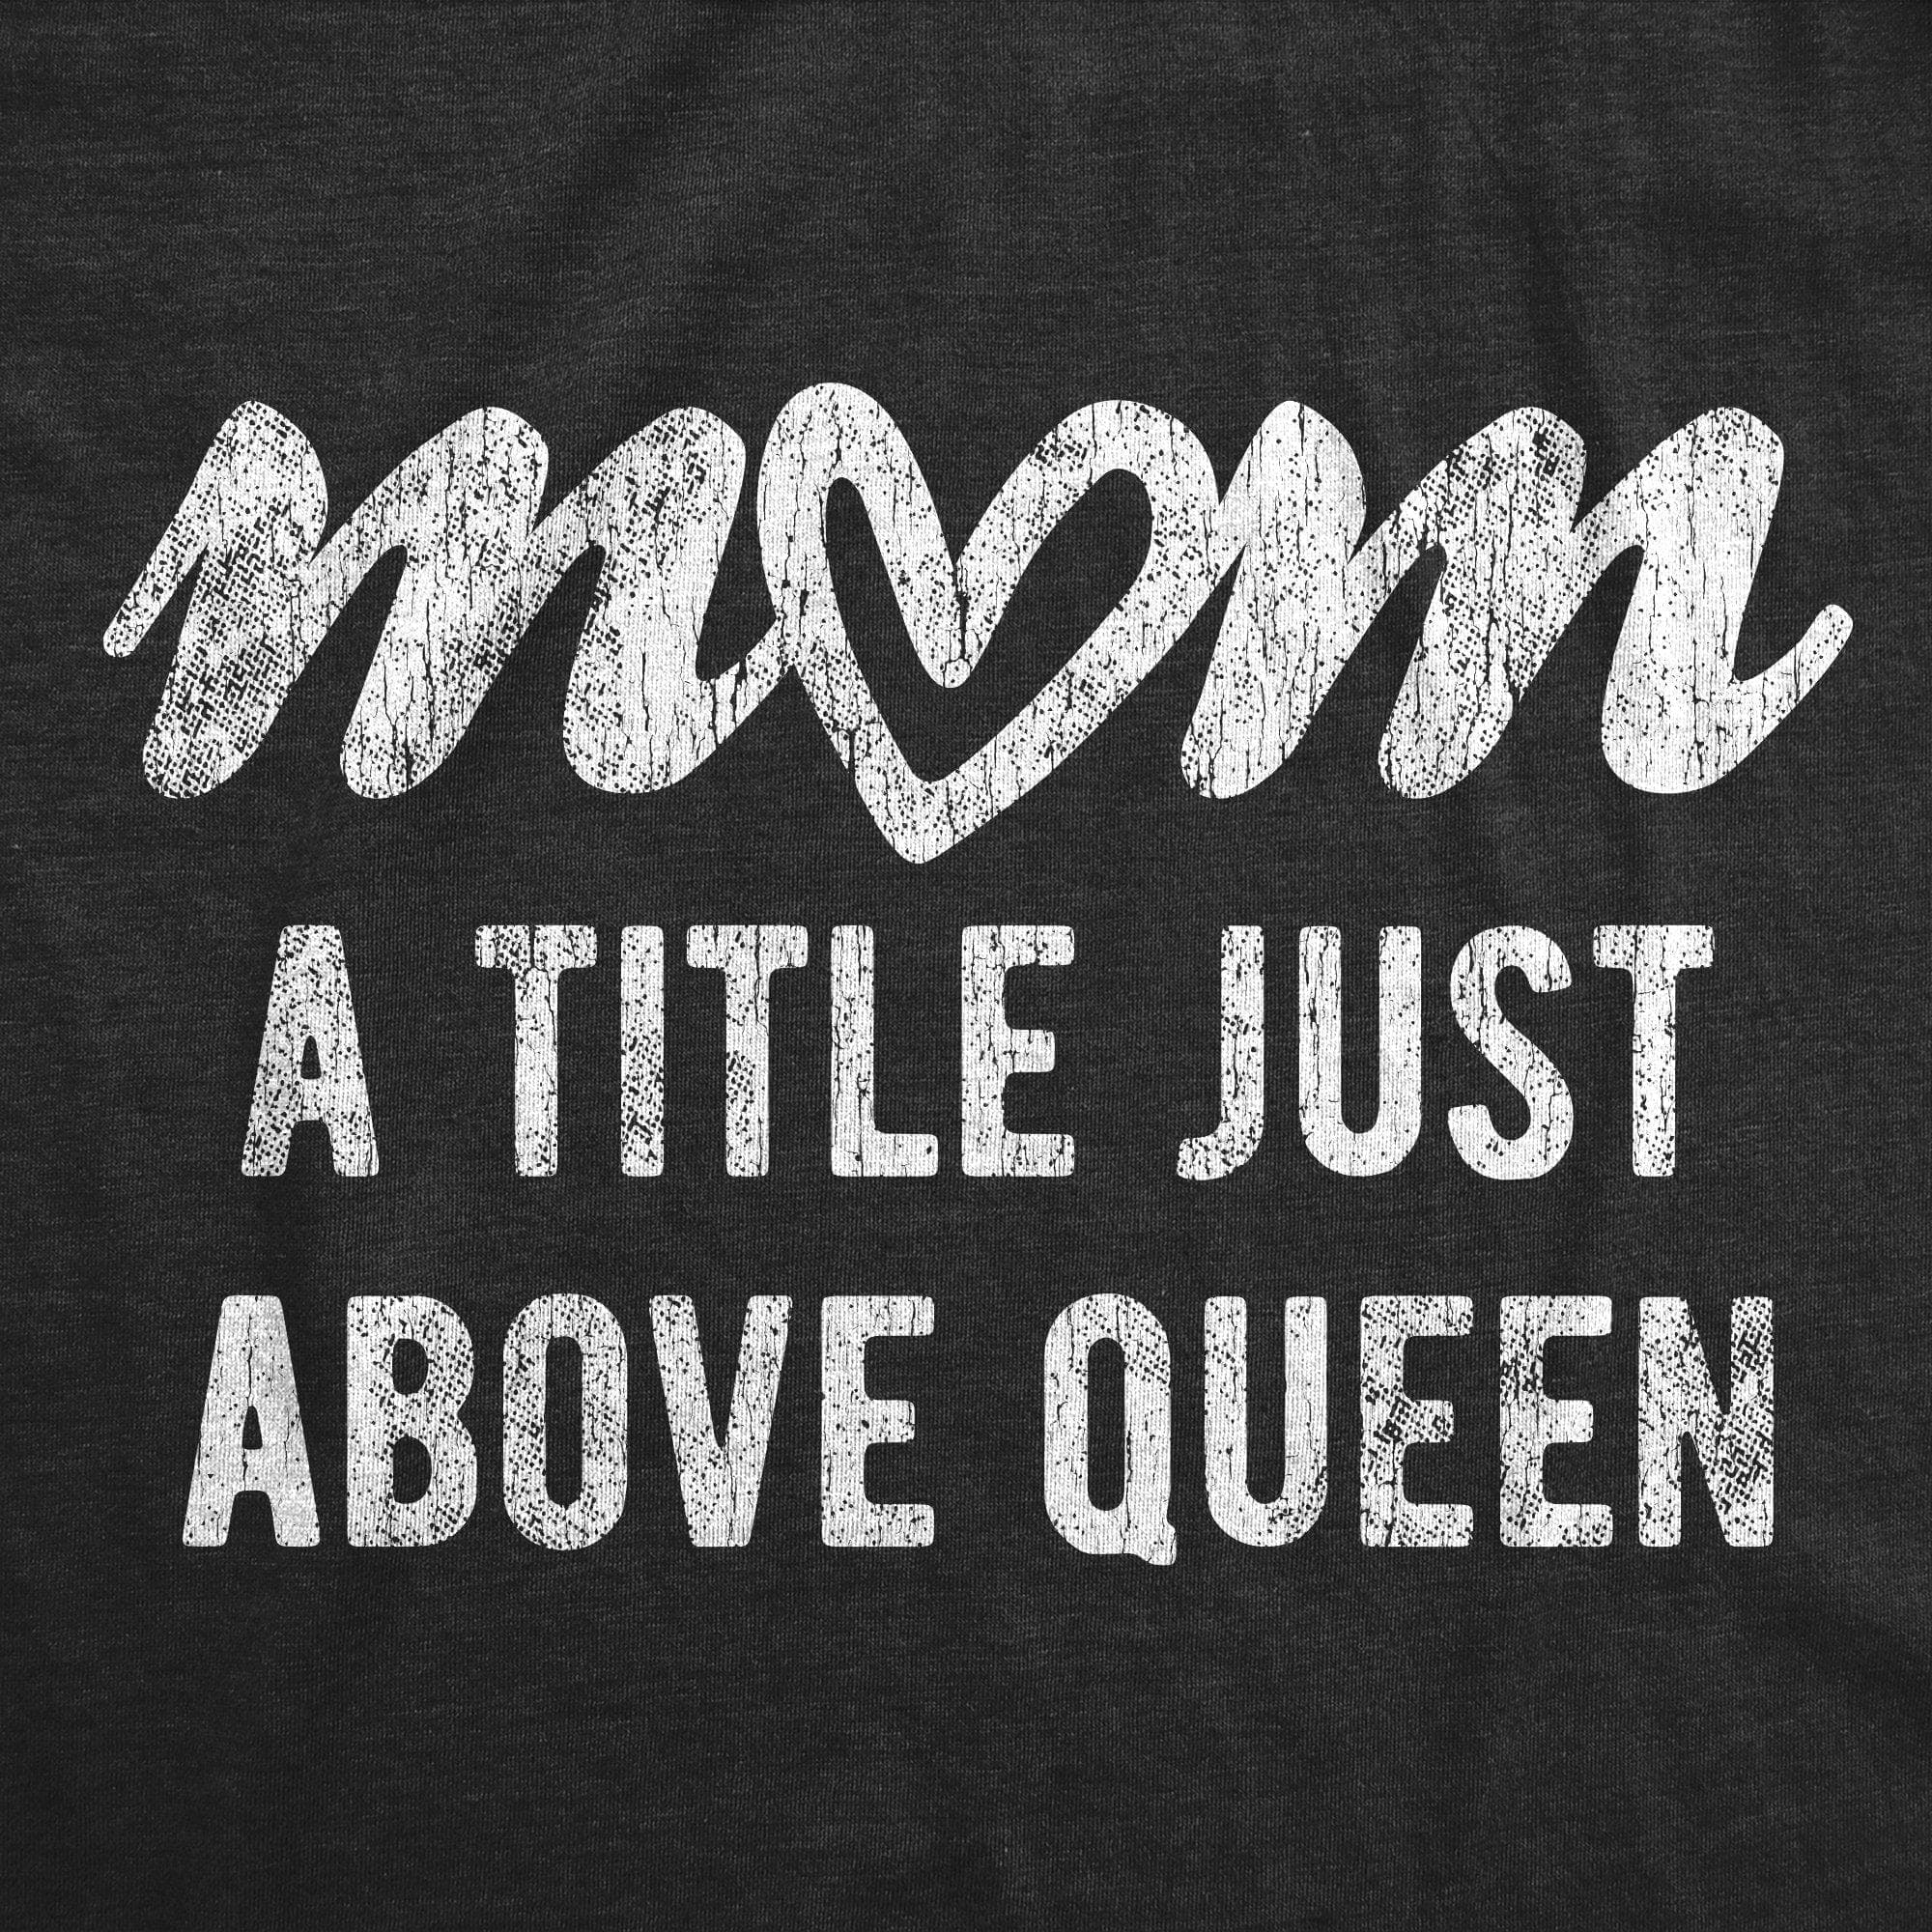 Mom A Title Just Above Queen Women's Tshirt - Crazy Dog T-Shirts